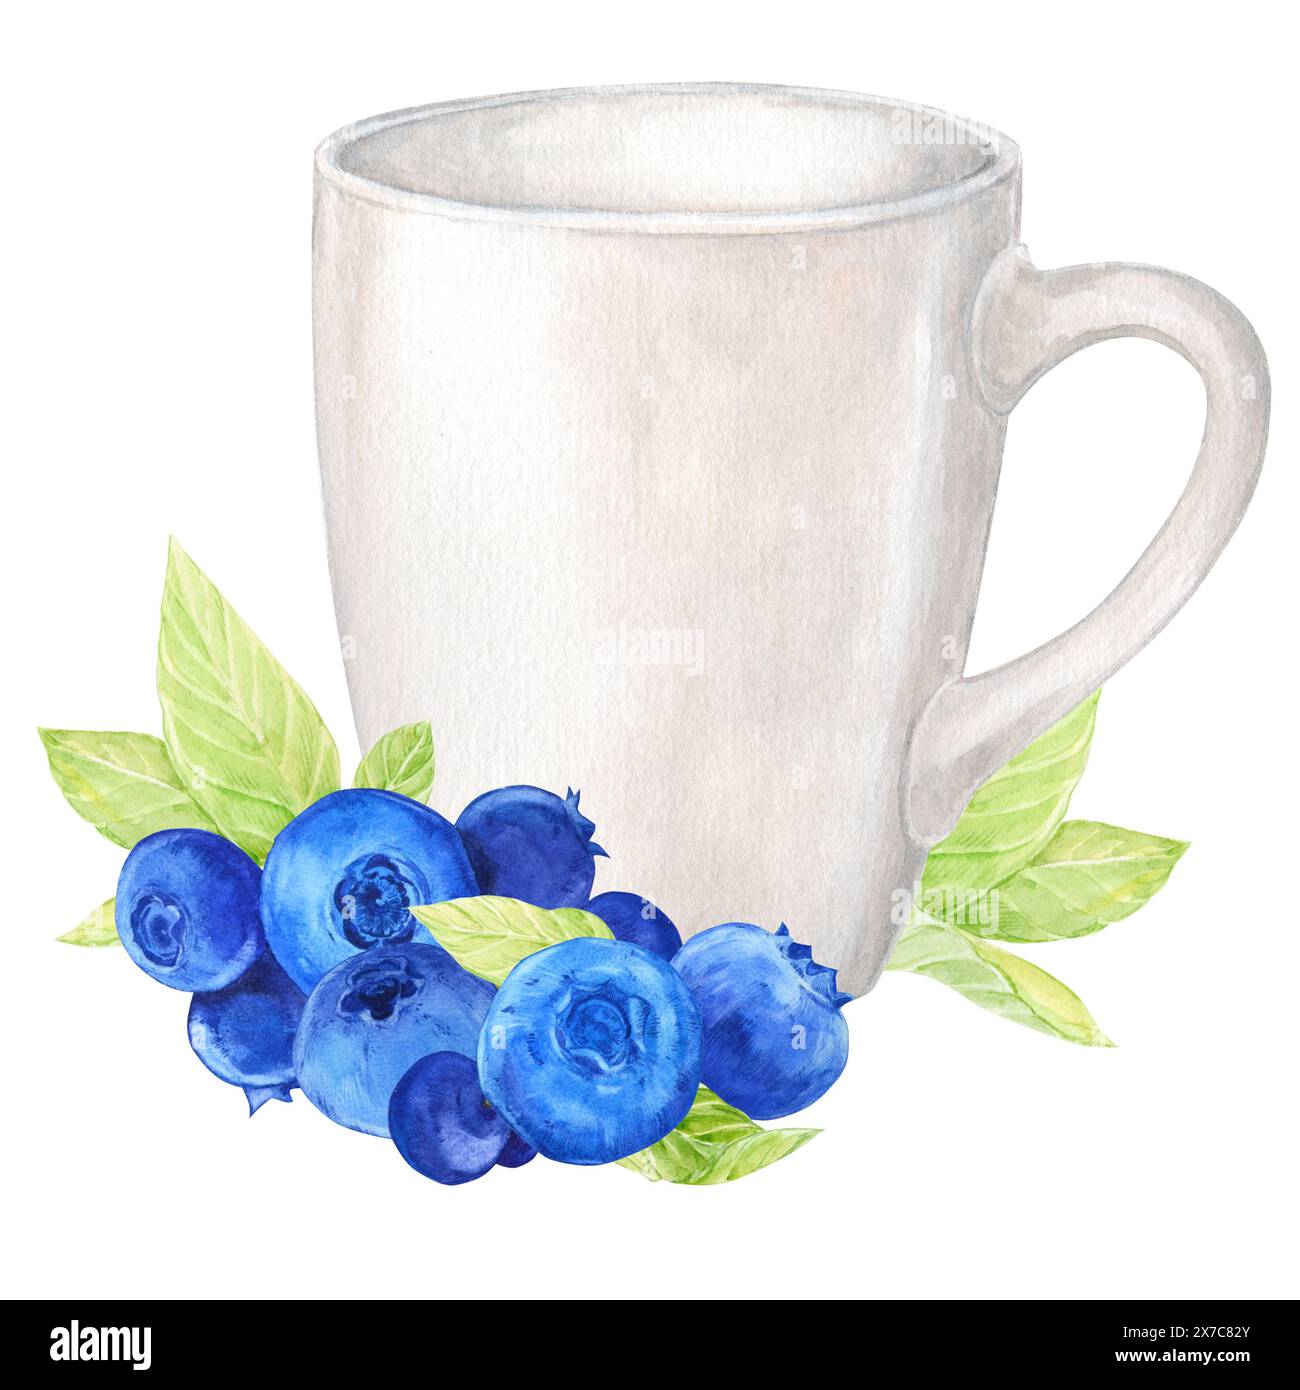 Blueberries and a cup, watercolor. Ripe berries, herbal tea in a white mug. Farm harvest, rustic style, botanical illustration. Clipart for packing yo Stock Photo